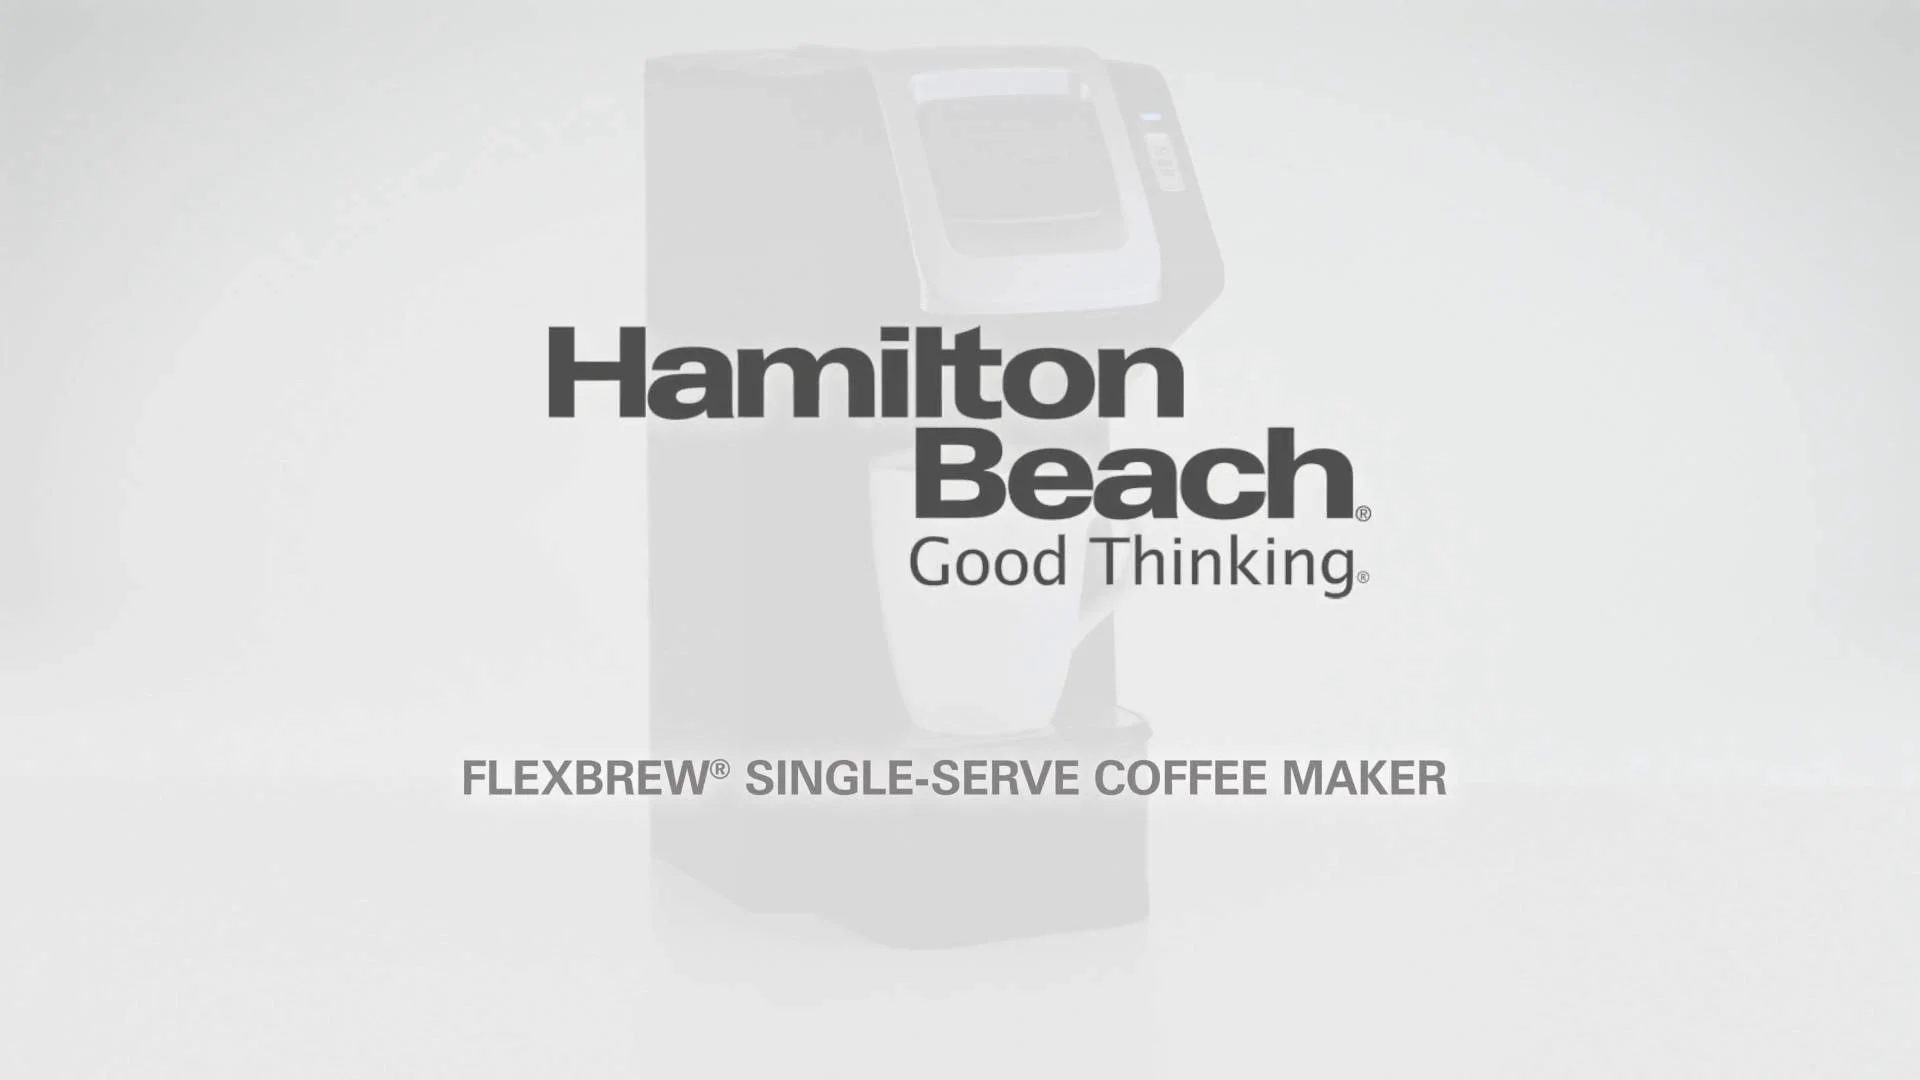  Hamilton Beach 49974 FlexBrew Single-Serve Coffee Maker  Compatible with Pod Packs and Grounds, 14.0 ounces, Black : Home & Kitchen